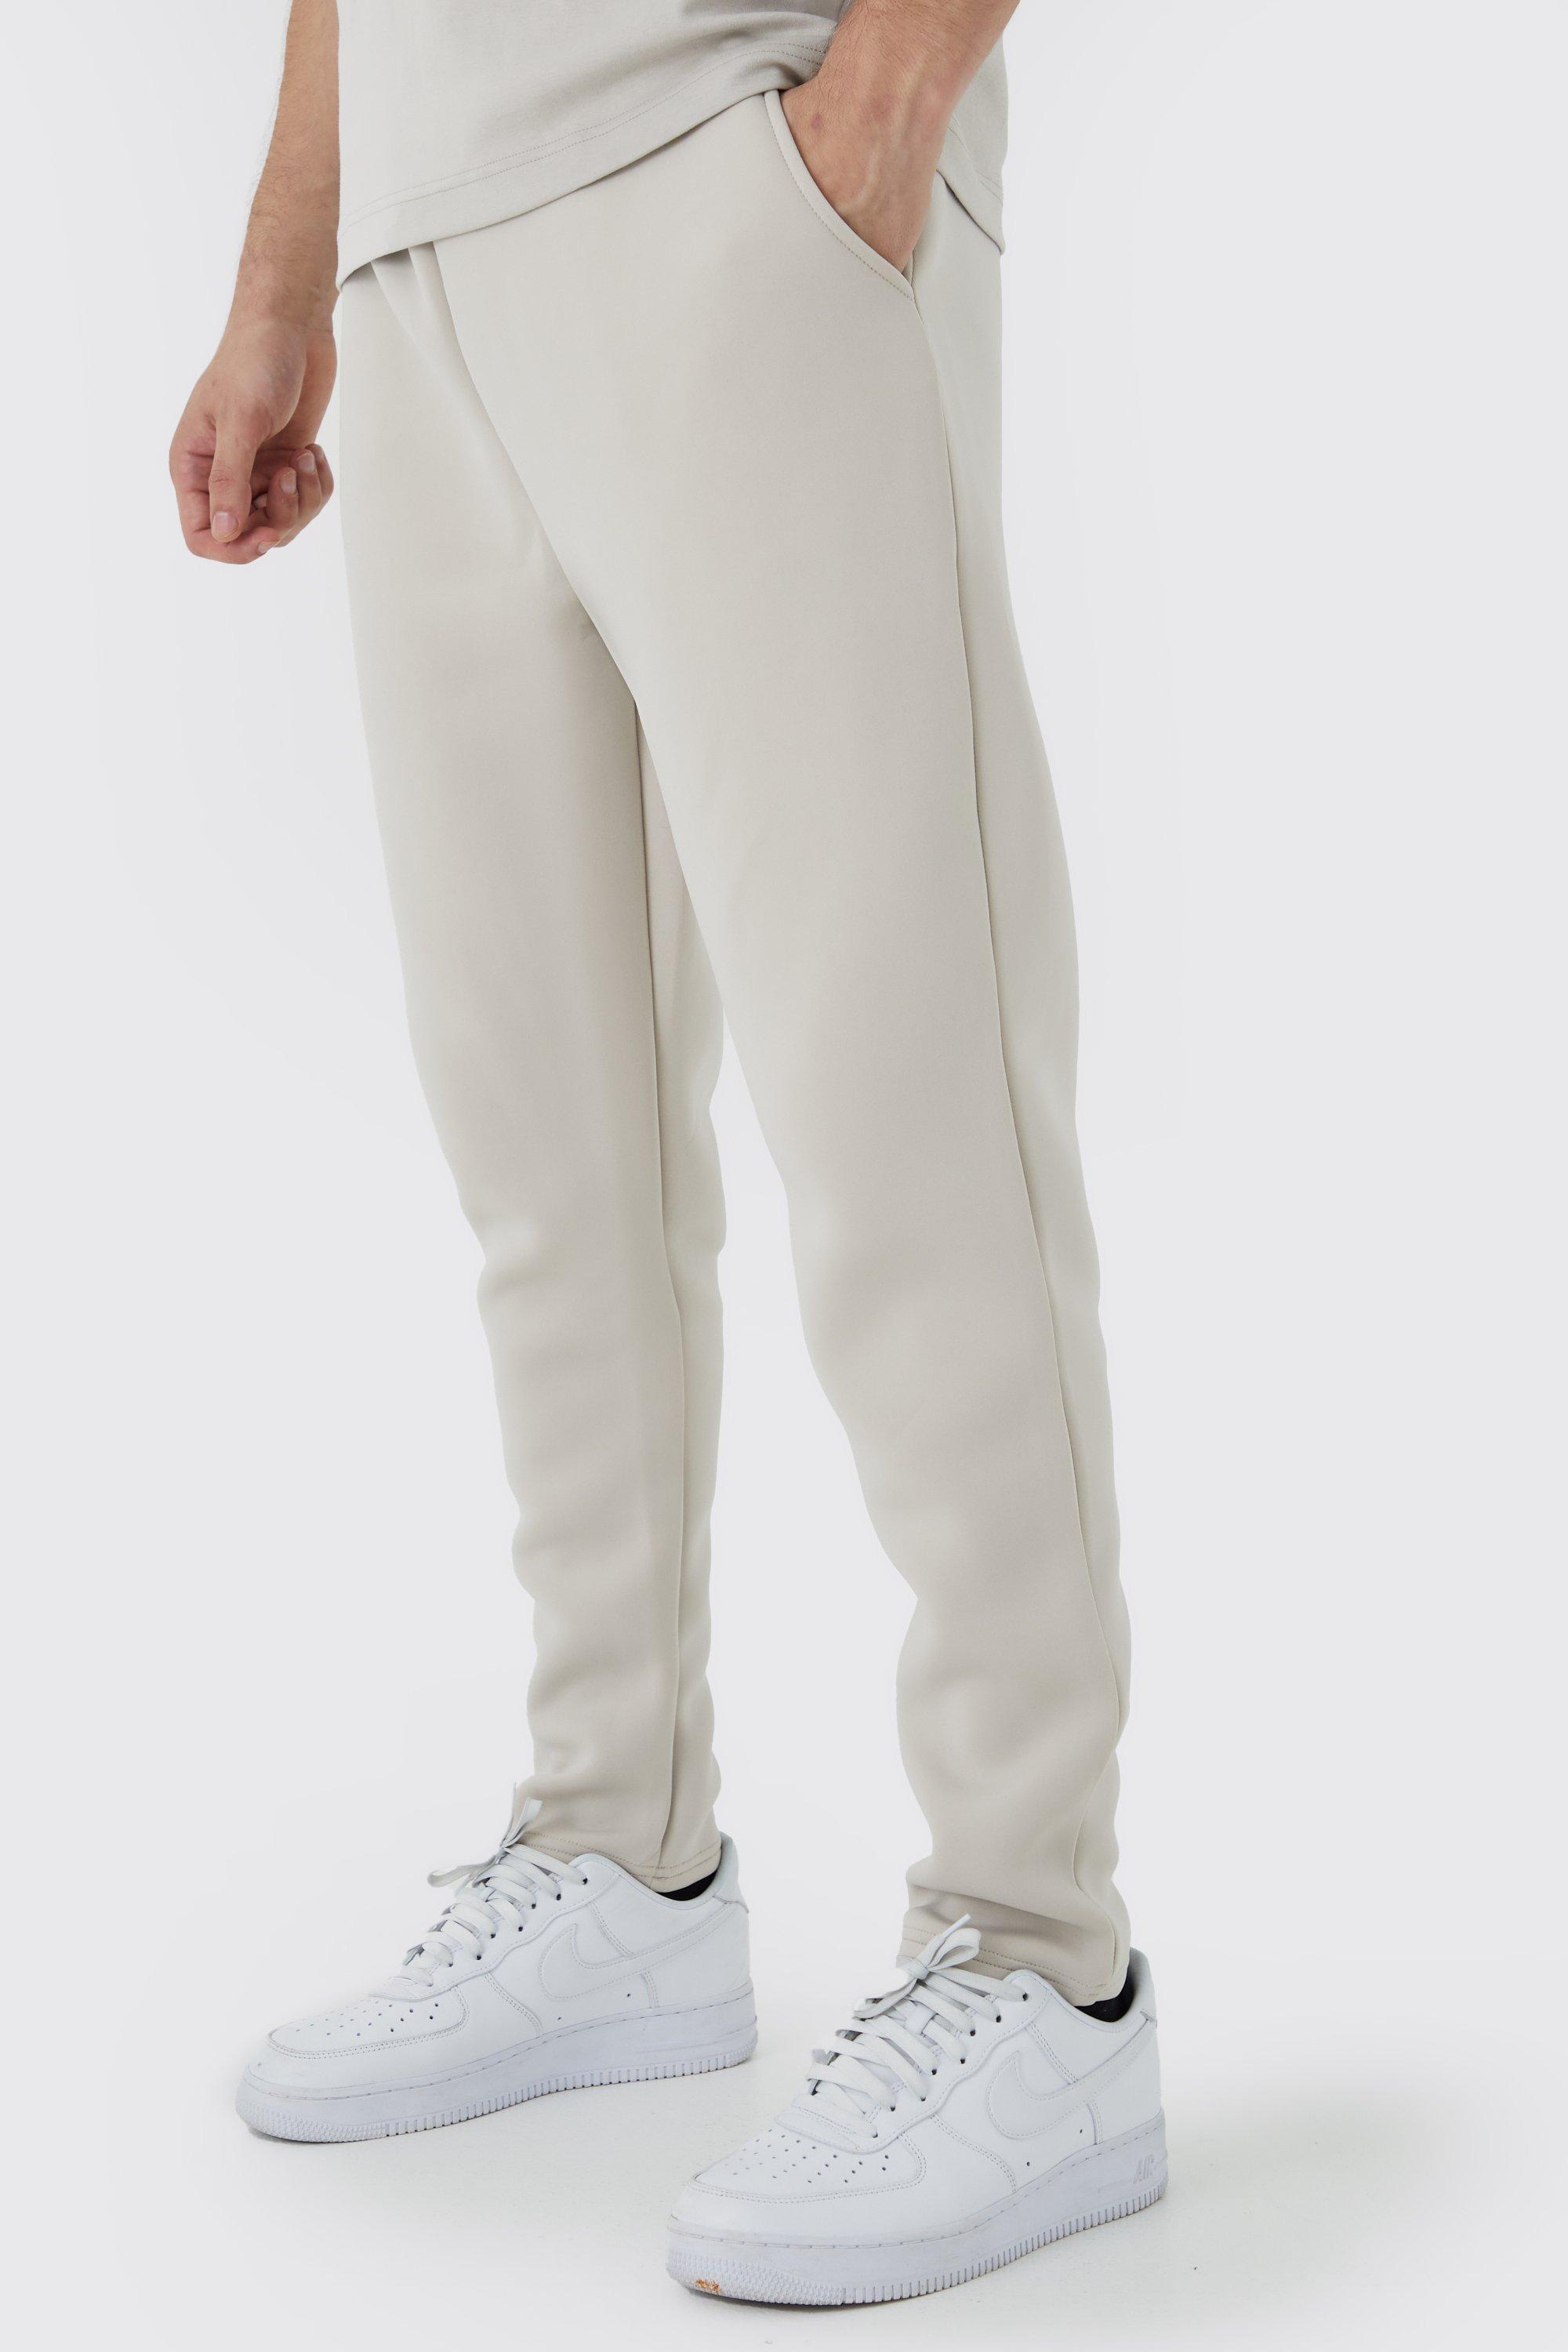 BoohooMAN Tall Slim Tapered Cropped Bonded Scuba Jogger in White